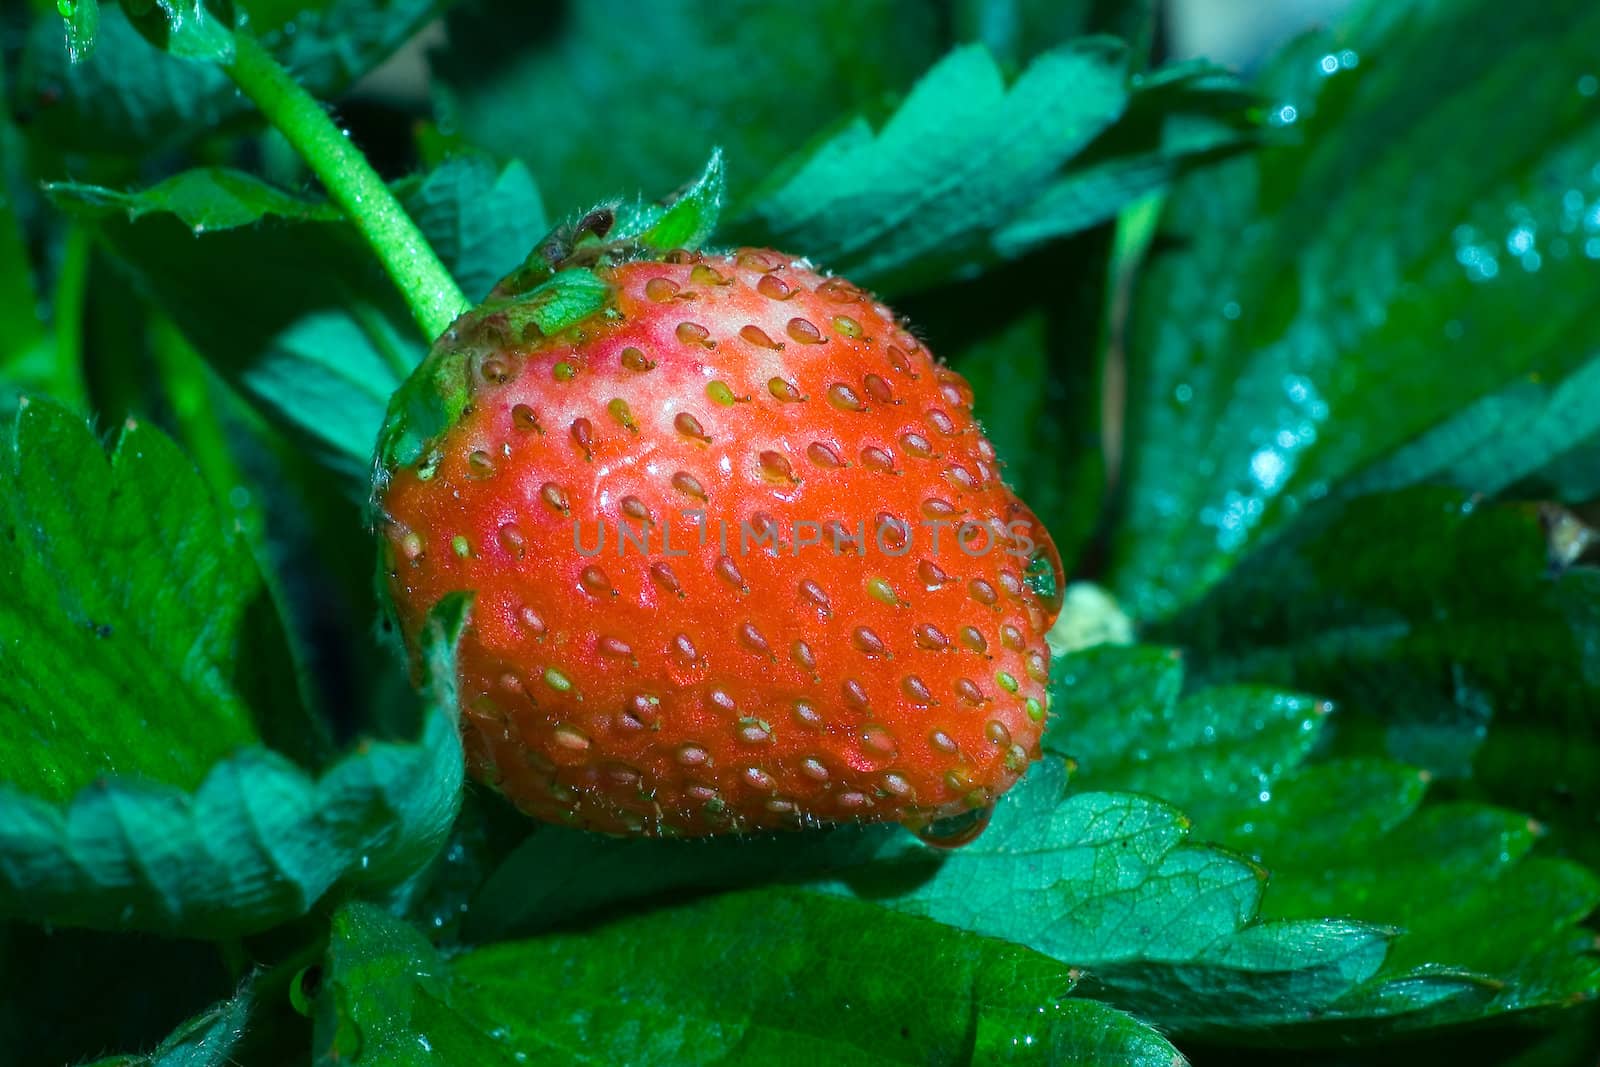 Thrickets of a strawberry by Vladimir